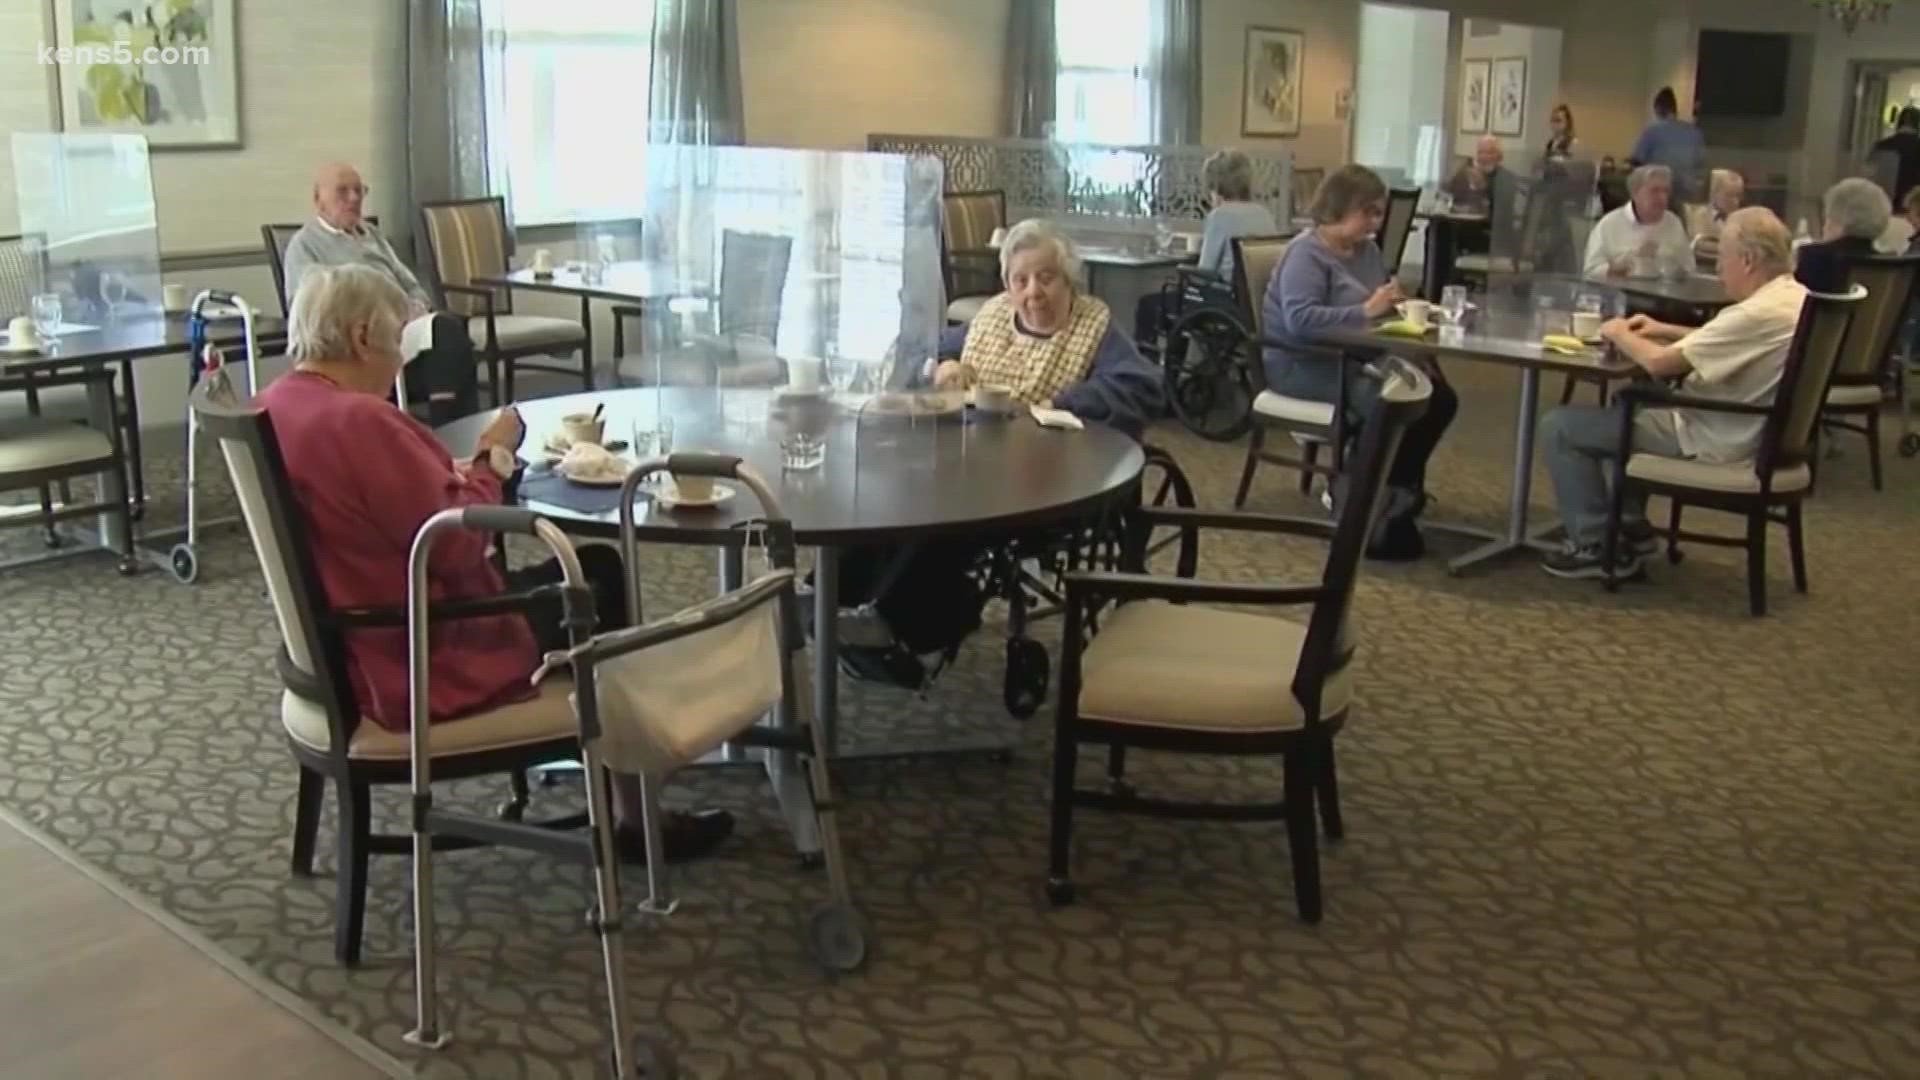 Staff at nursing homes and long-term care centers are undertaking new efforts to protect residents.